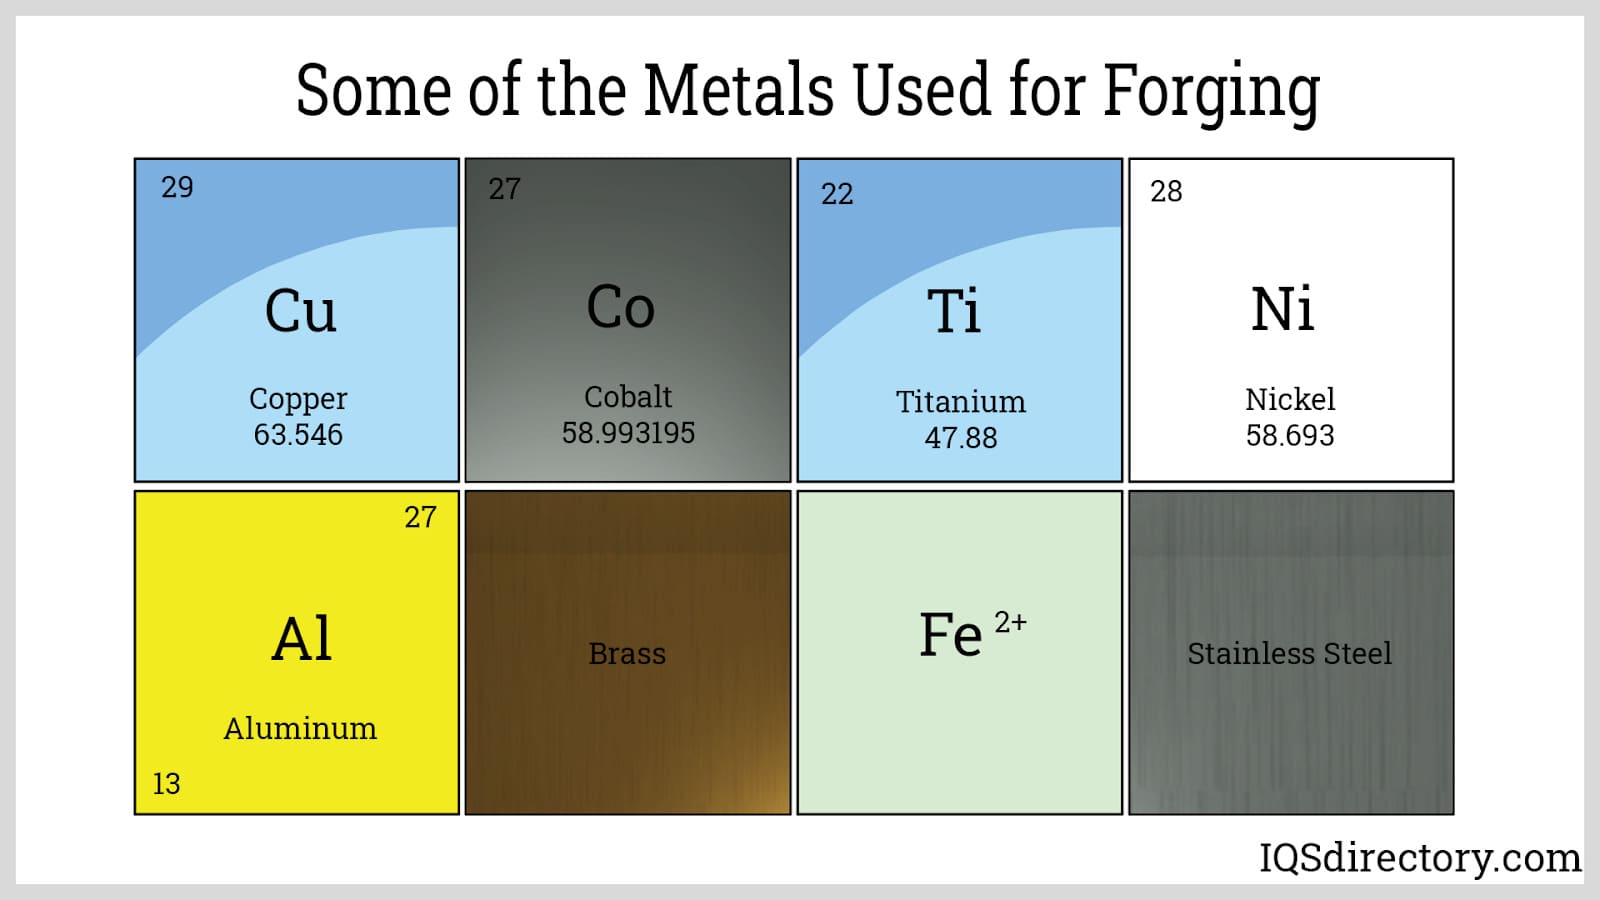 Some of the Metals Used for Forging